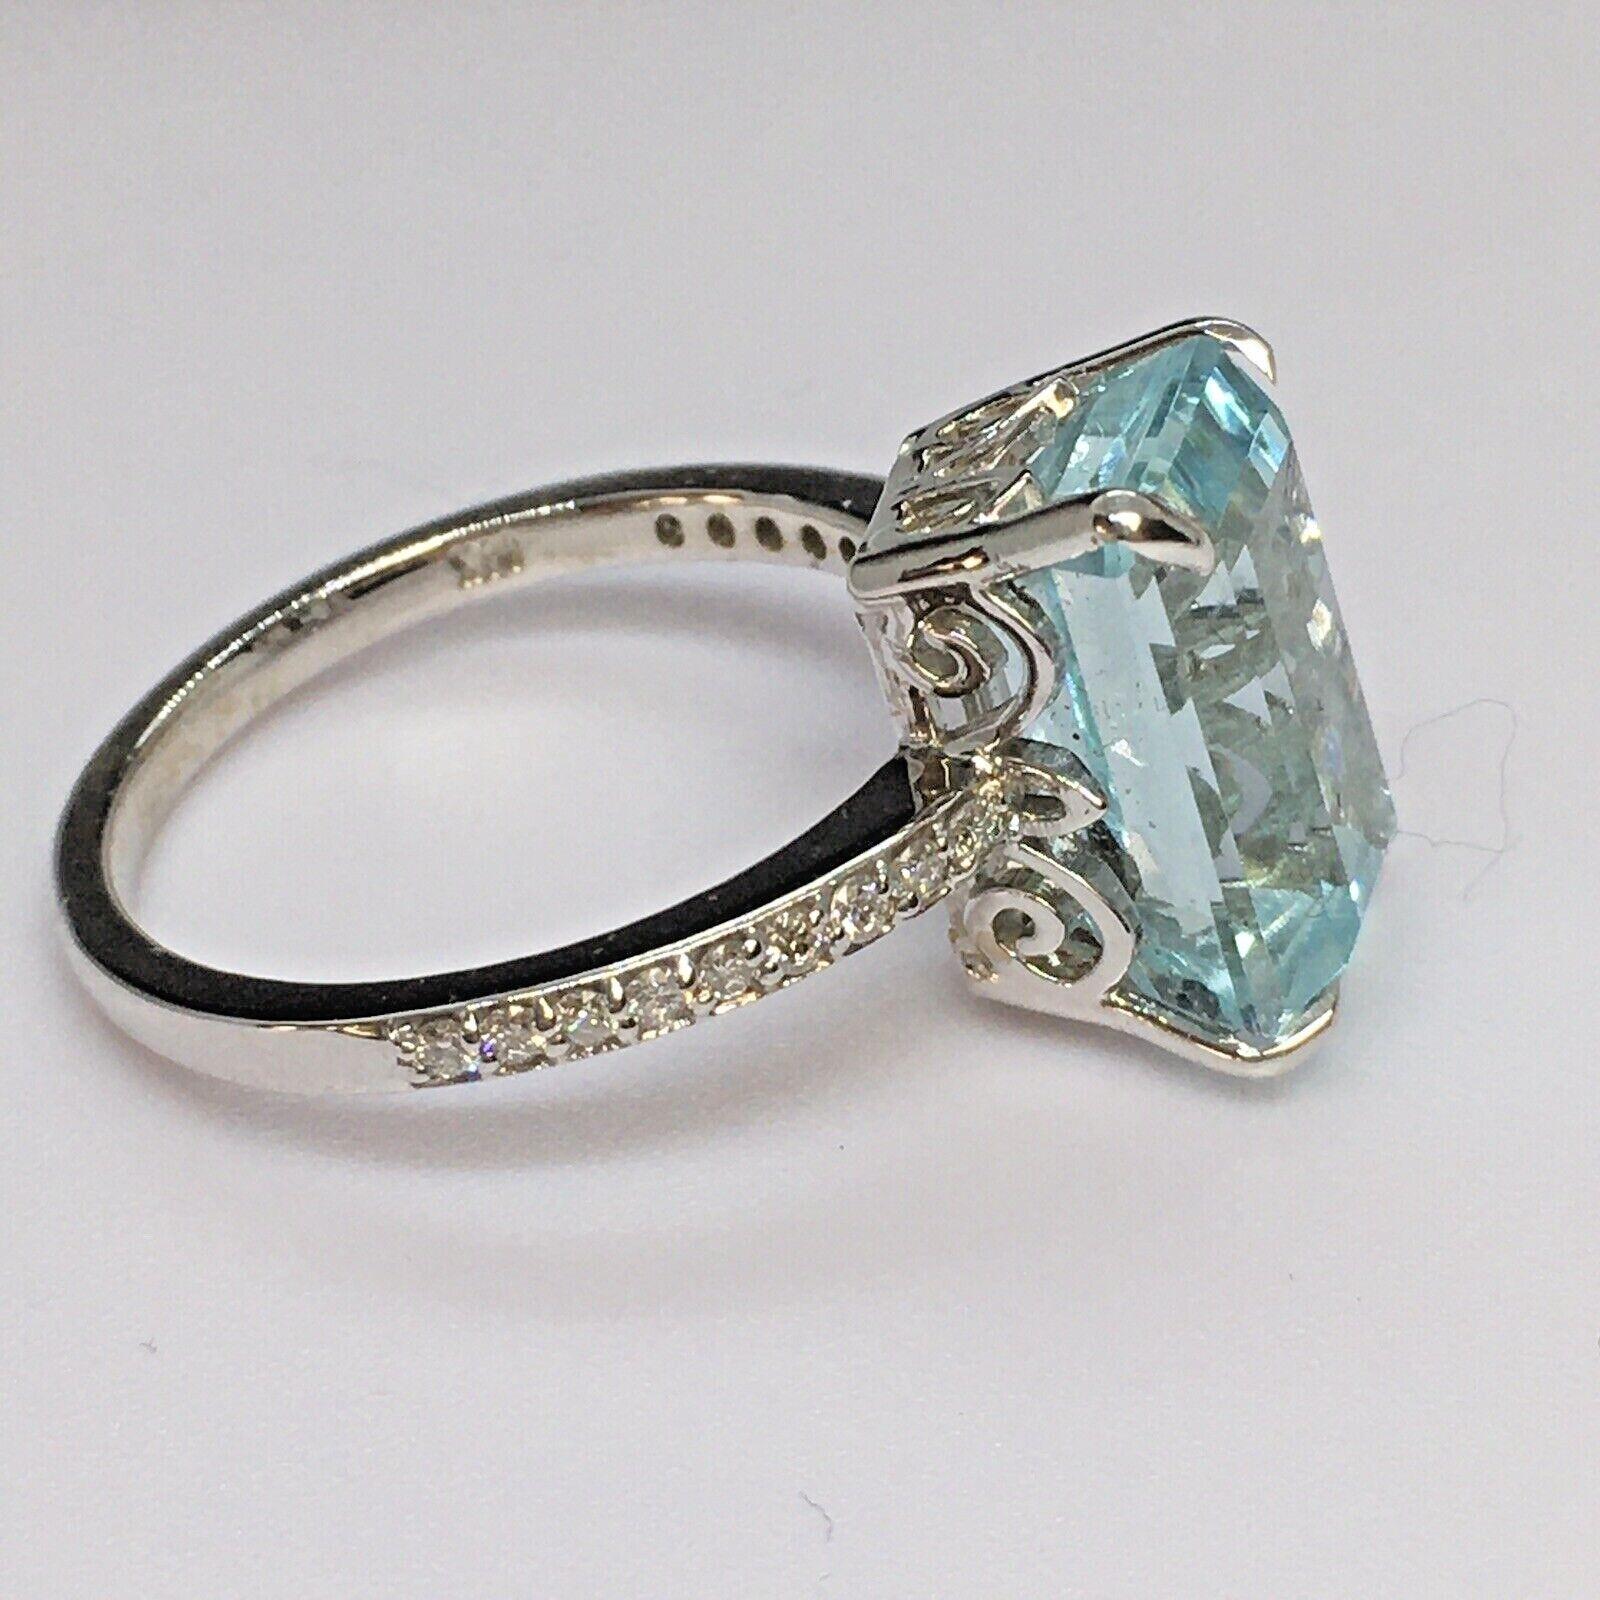 Natural Color Earth Mined 4.5 ct Aquamarine 1/4 Ct Diamond 14k White gold ring

A 12.8 mm by 8 mm by 6.1 mm, 4.5 Carat Earth Mined Aquamarine
Ring is weighting 4.1 gram 14K white gold
1/4 carat 18 pieces 1.3 mm E-F color, VS1 clarity Diamonds
Finger